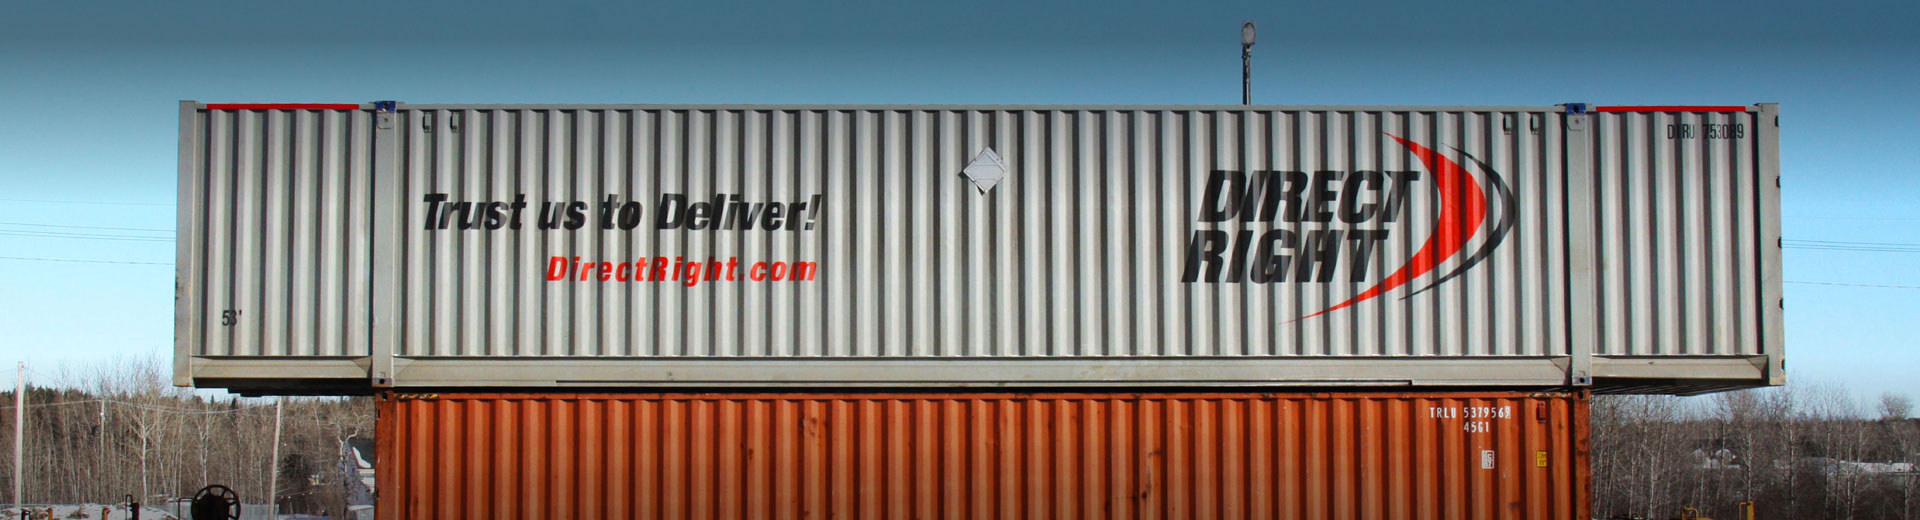 53' Direct Right branded intermodal containers on rail car in Canada